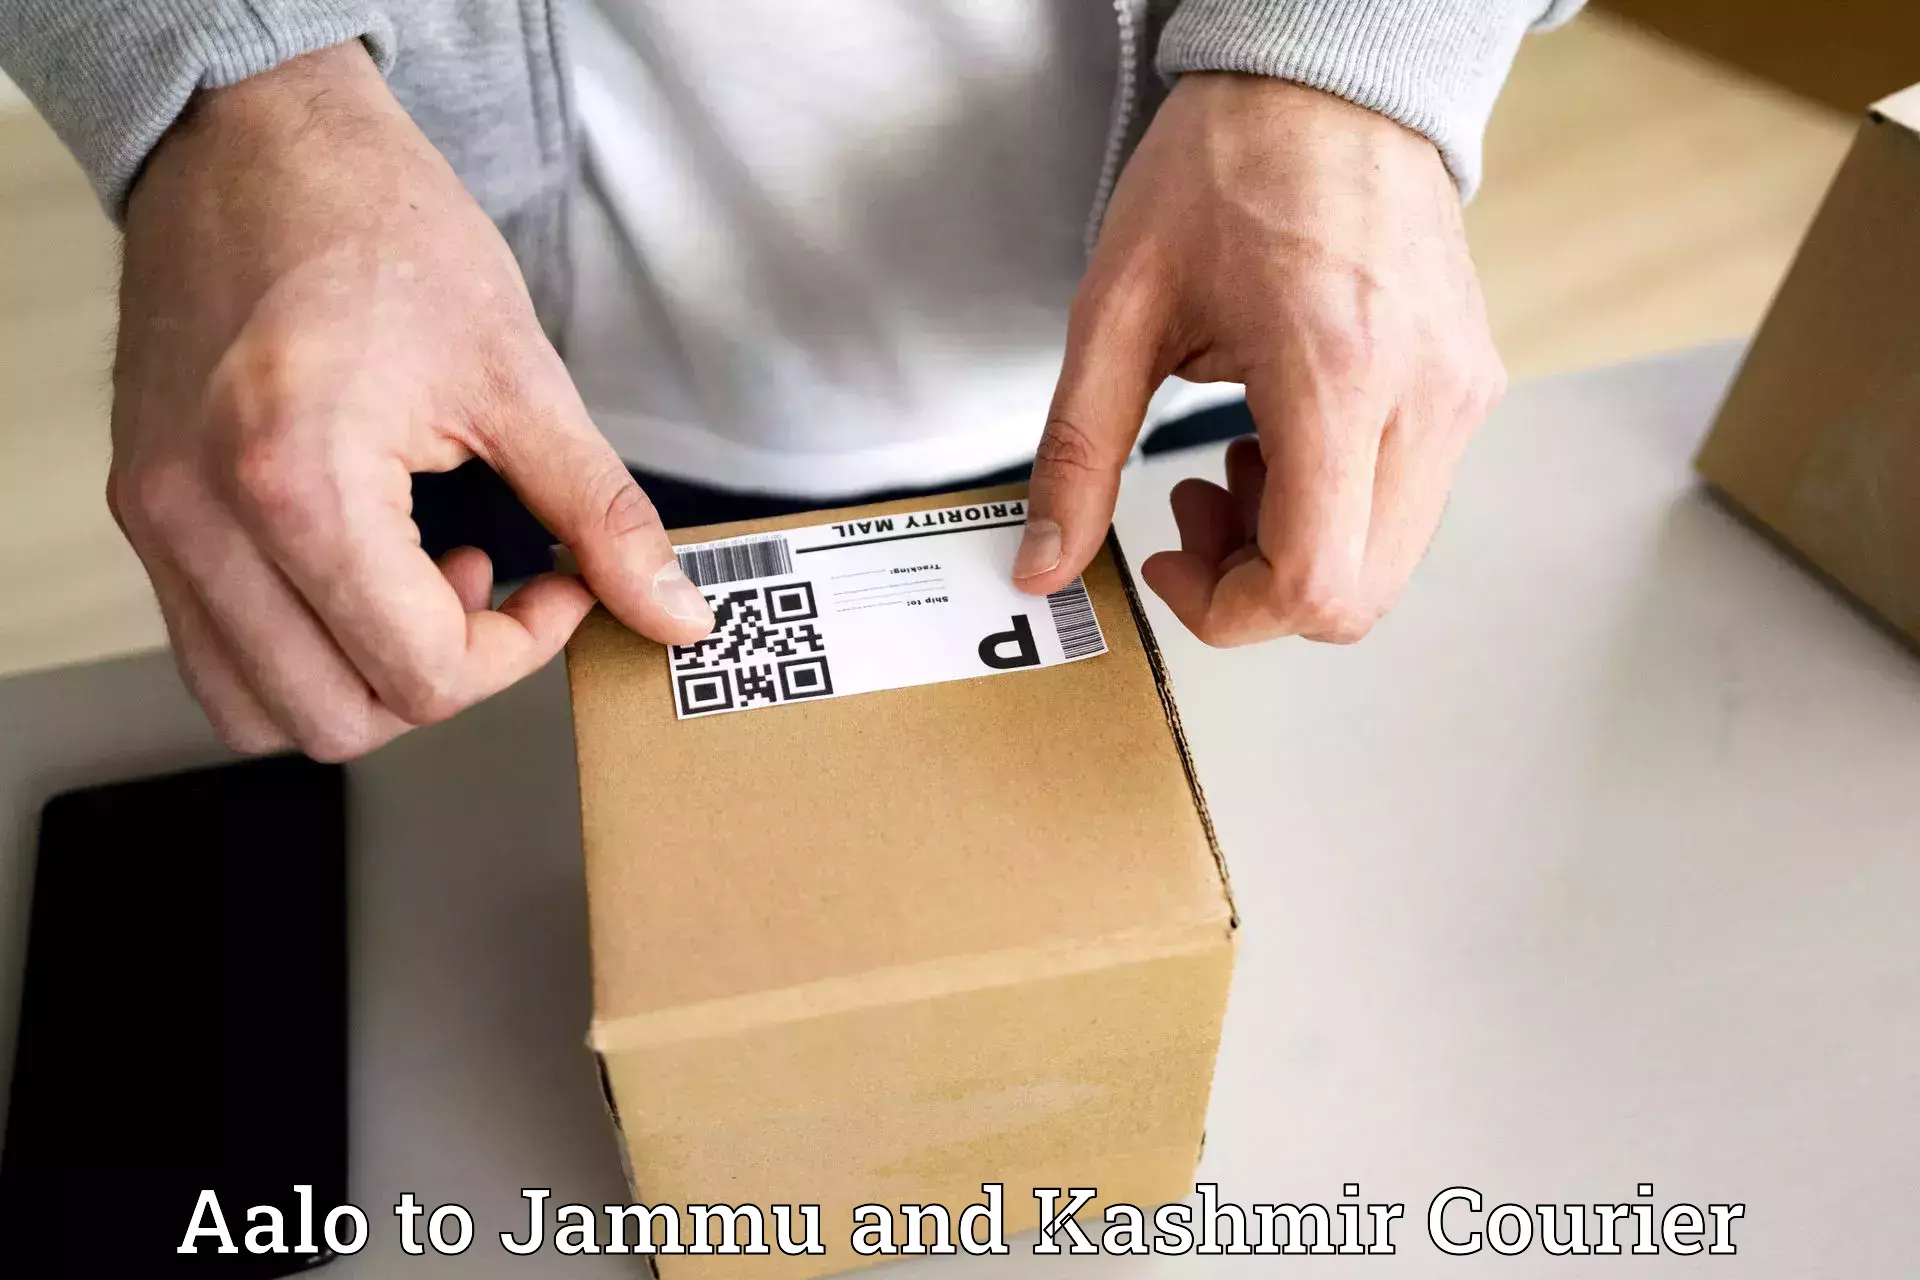 Bulk courier orders Aalo to Jammu